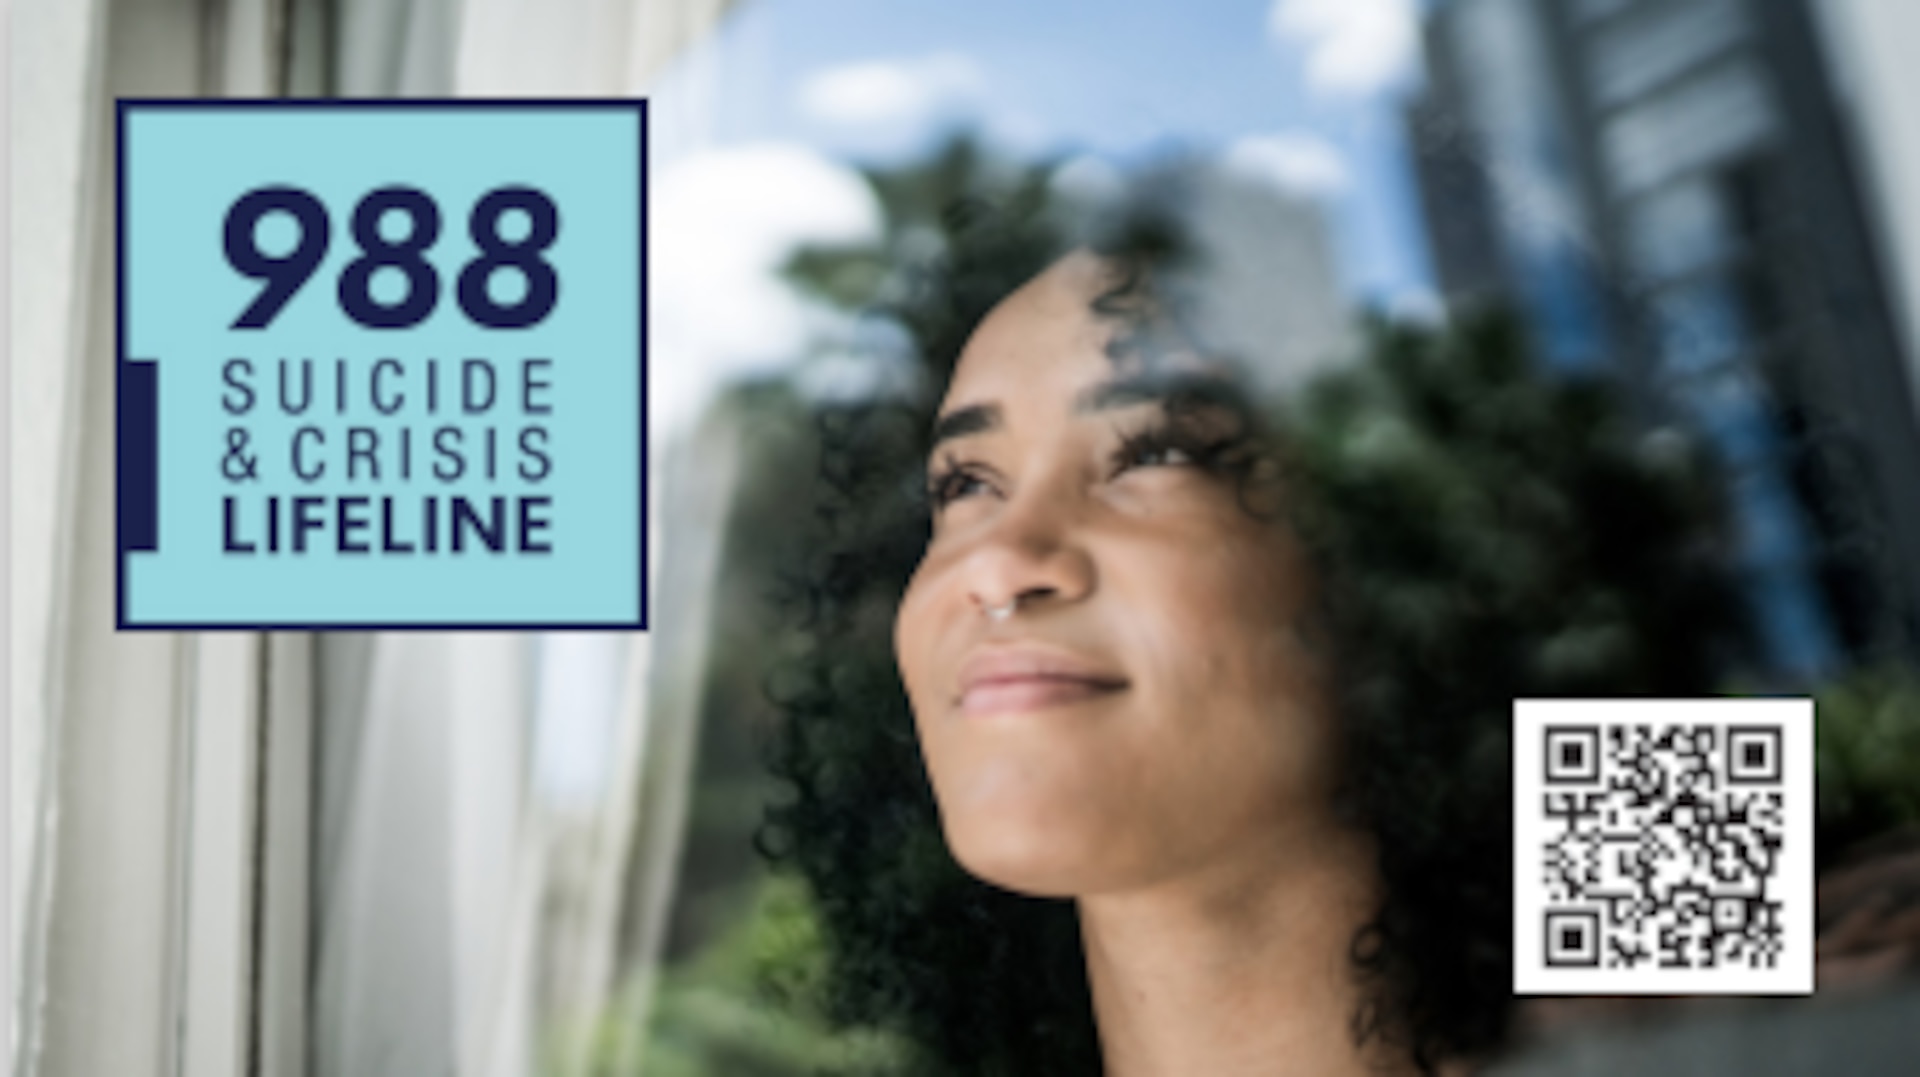 New suicide and crisis lifeline – 988 – now available throughout the United States for immediate crisis care. (Graphic courtesy Substance Abuse and Mental Health Services Administration)